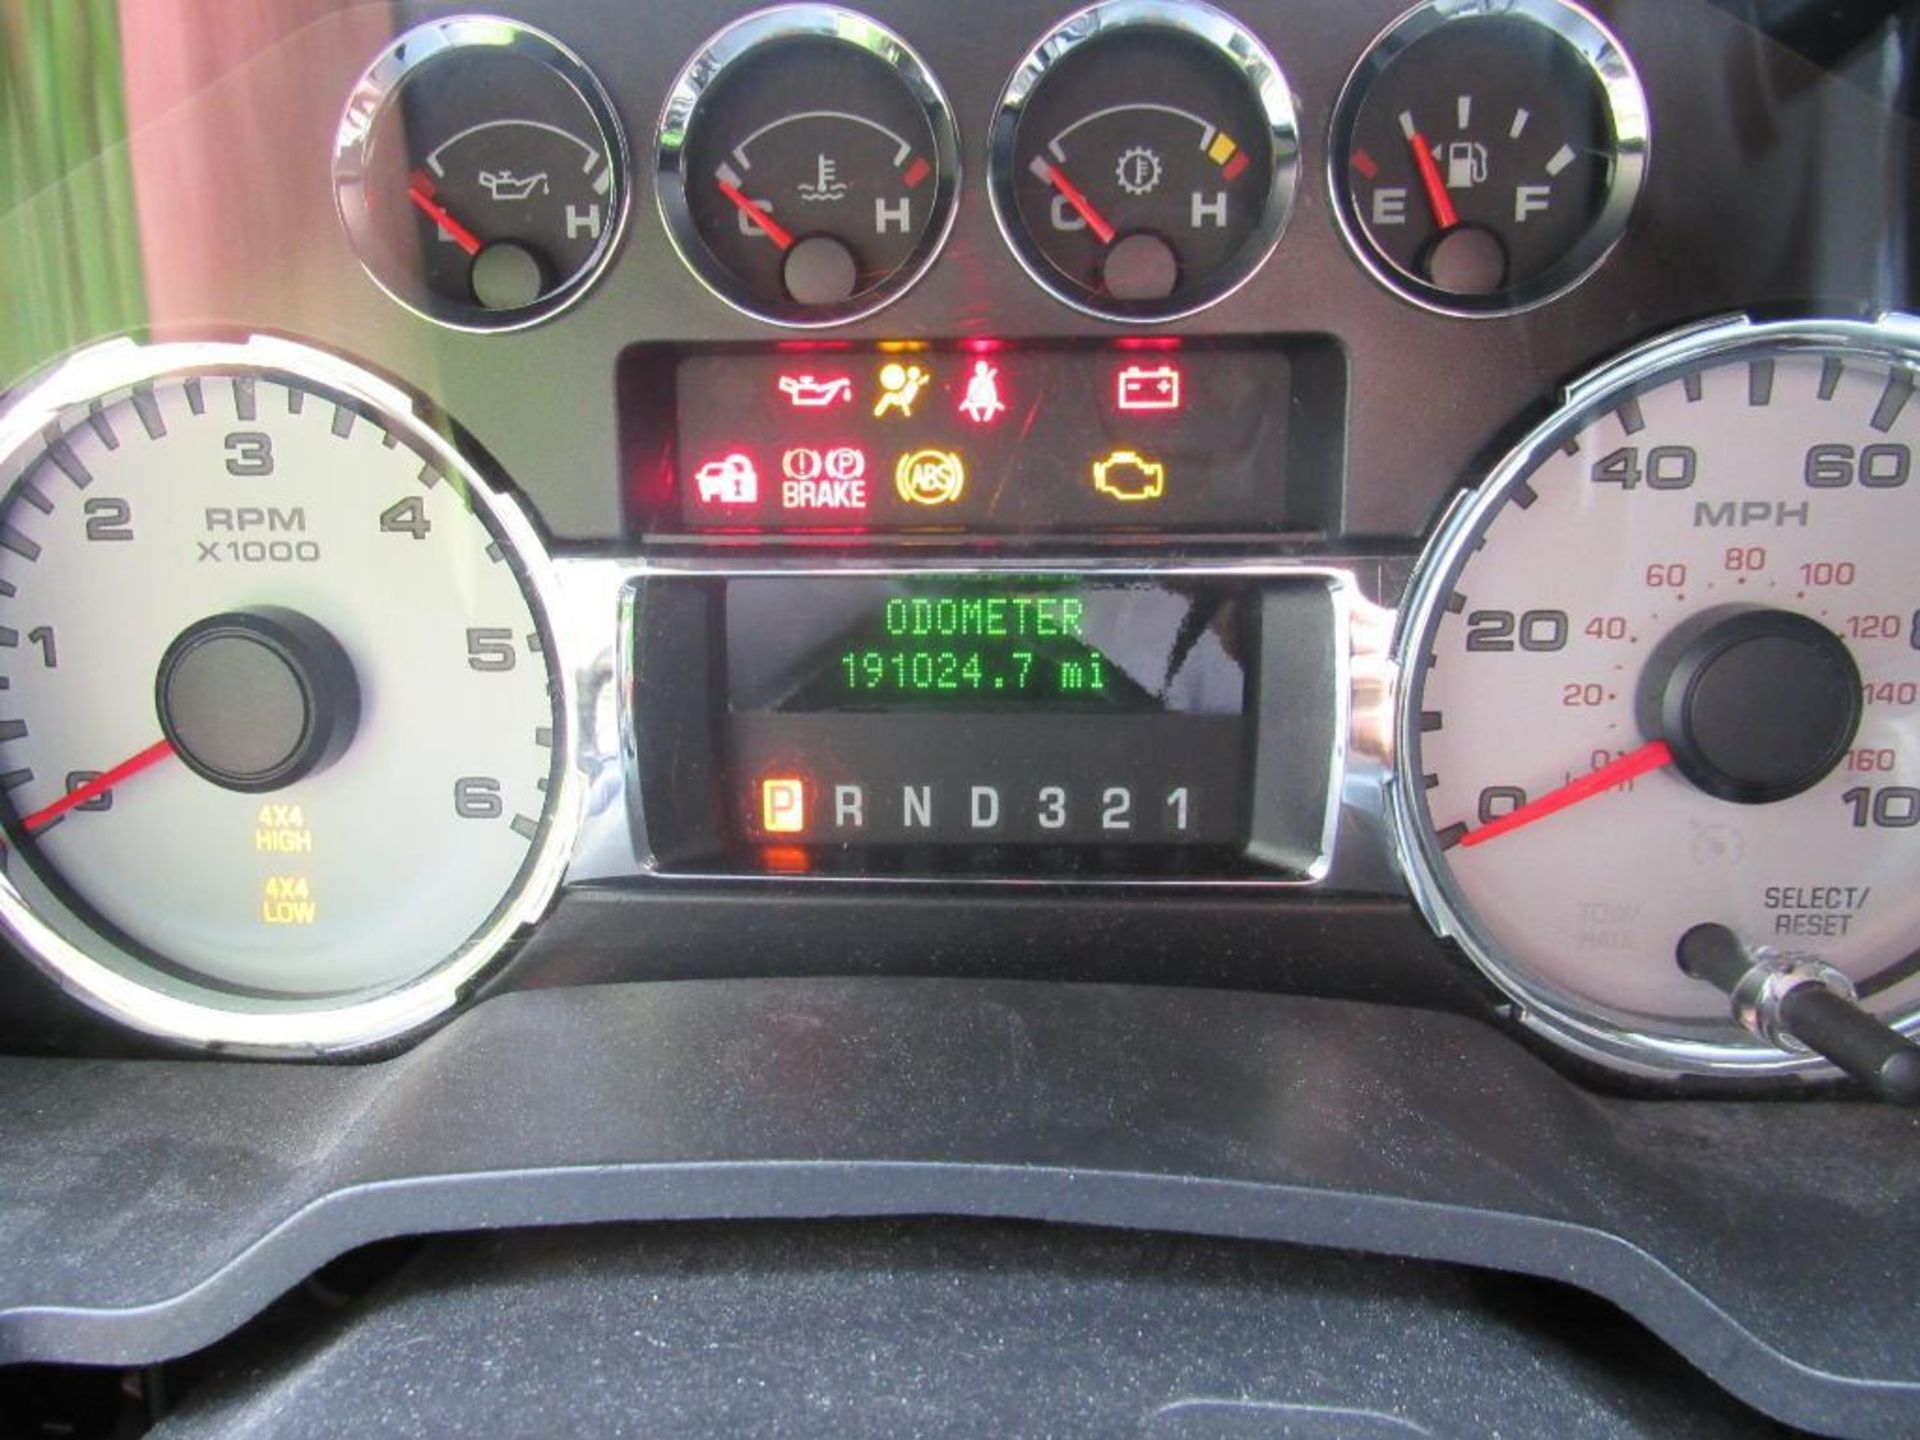 FORD 2009 F350 Crew Cab Dually, VIN 1FTWW33Y99EA69118, 191,024 Indicated Miles (NEEDS ENGINE - EMERG - Image 14 of 16